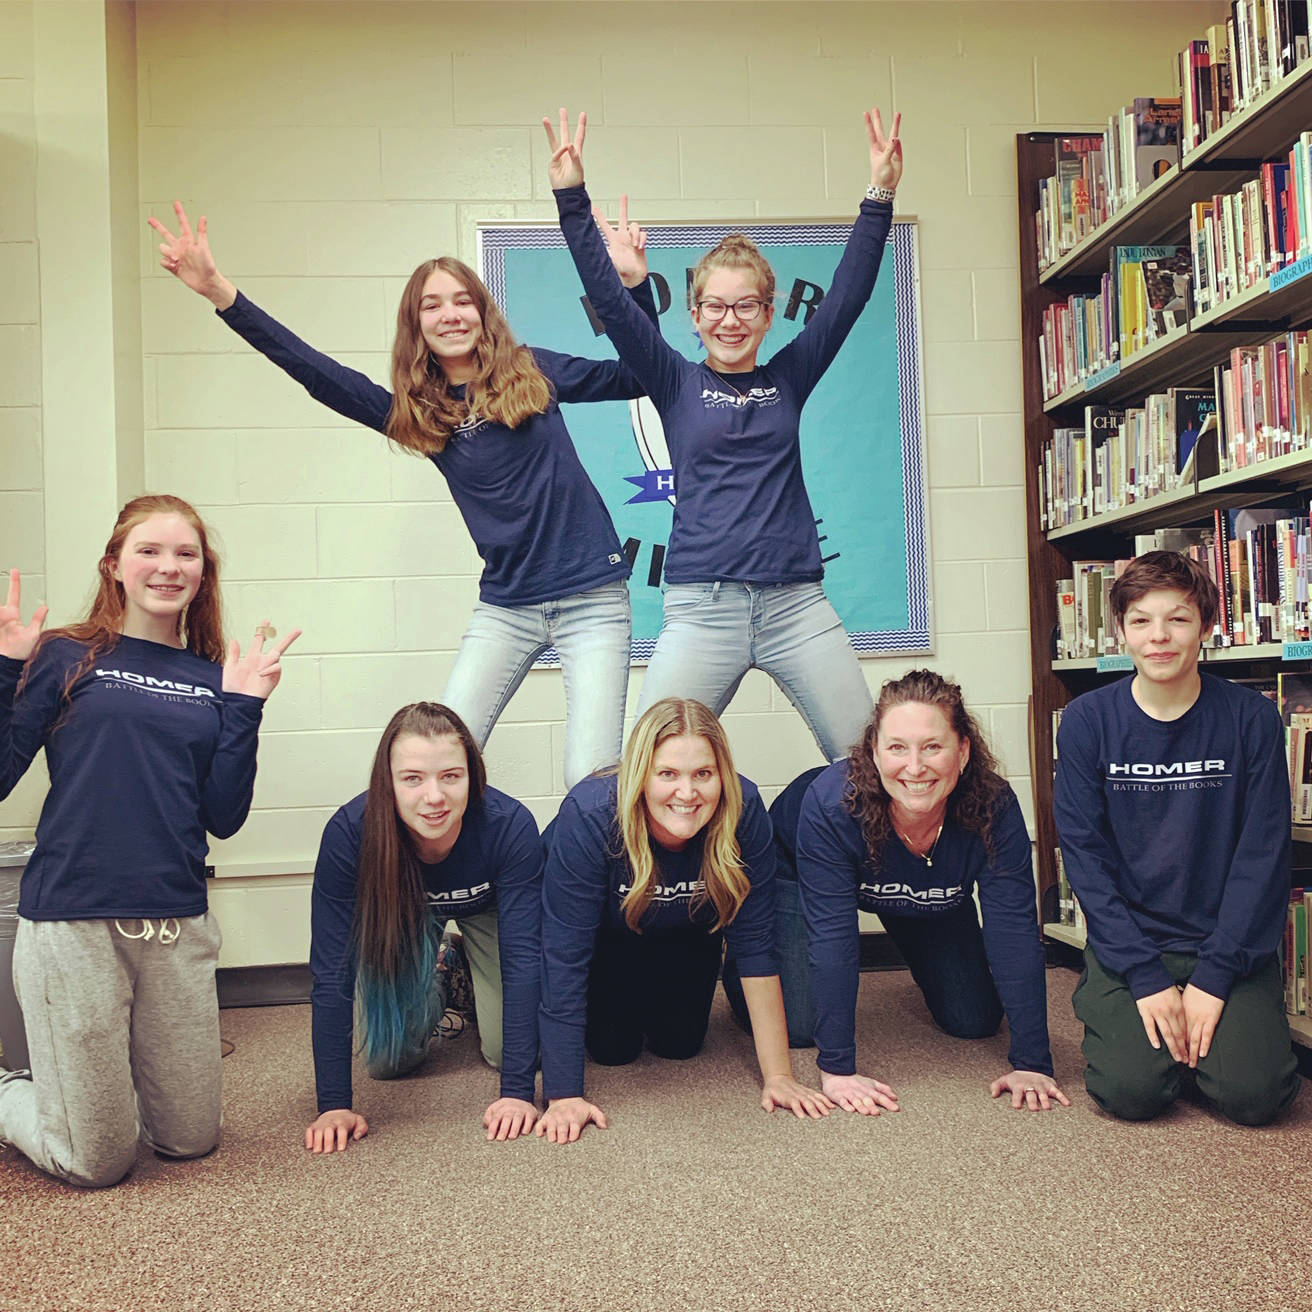 Homer Middle School Principal Kari Dendurent (second from right) has fun with her students in this undated photo at the school in Homer, Alaska. (Photo courtesy Kari Dendurent)